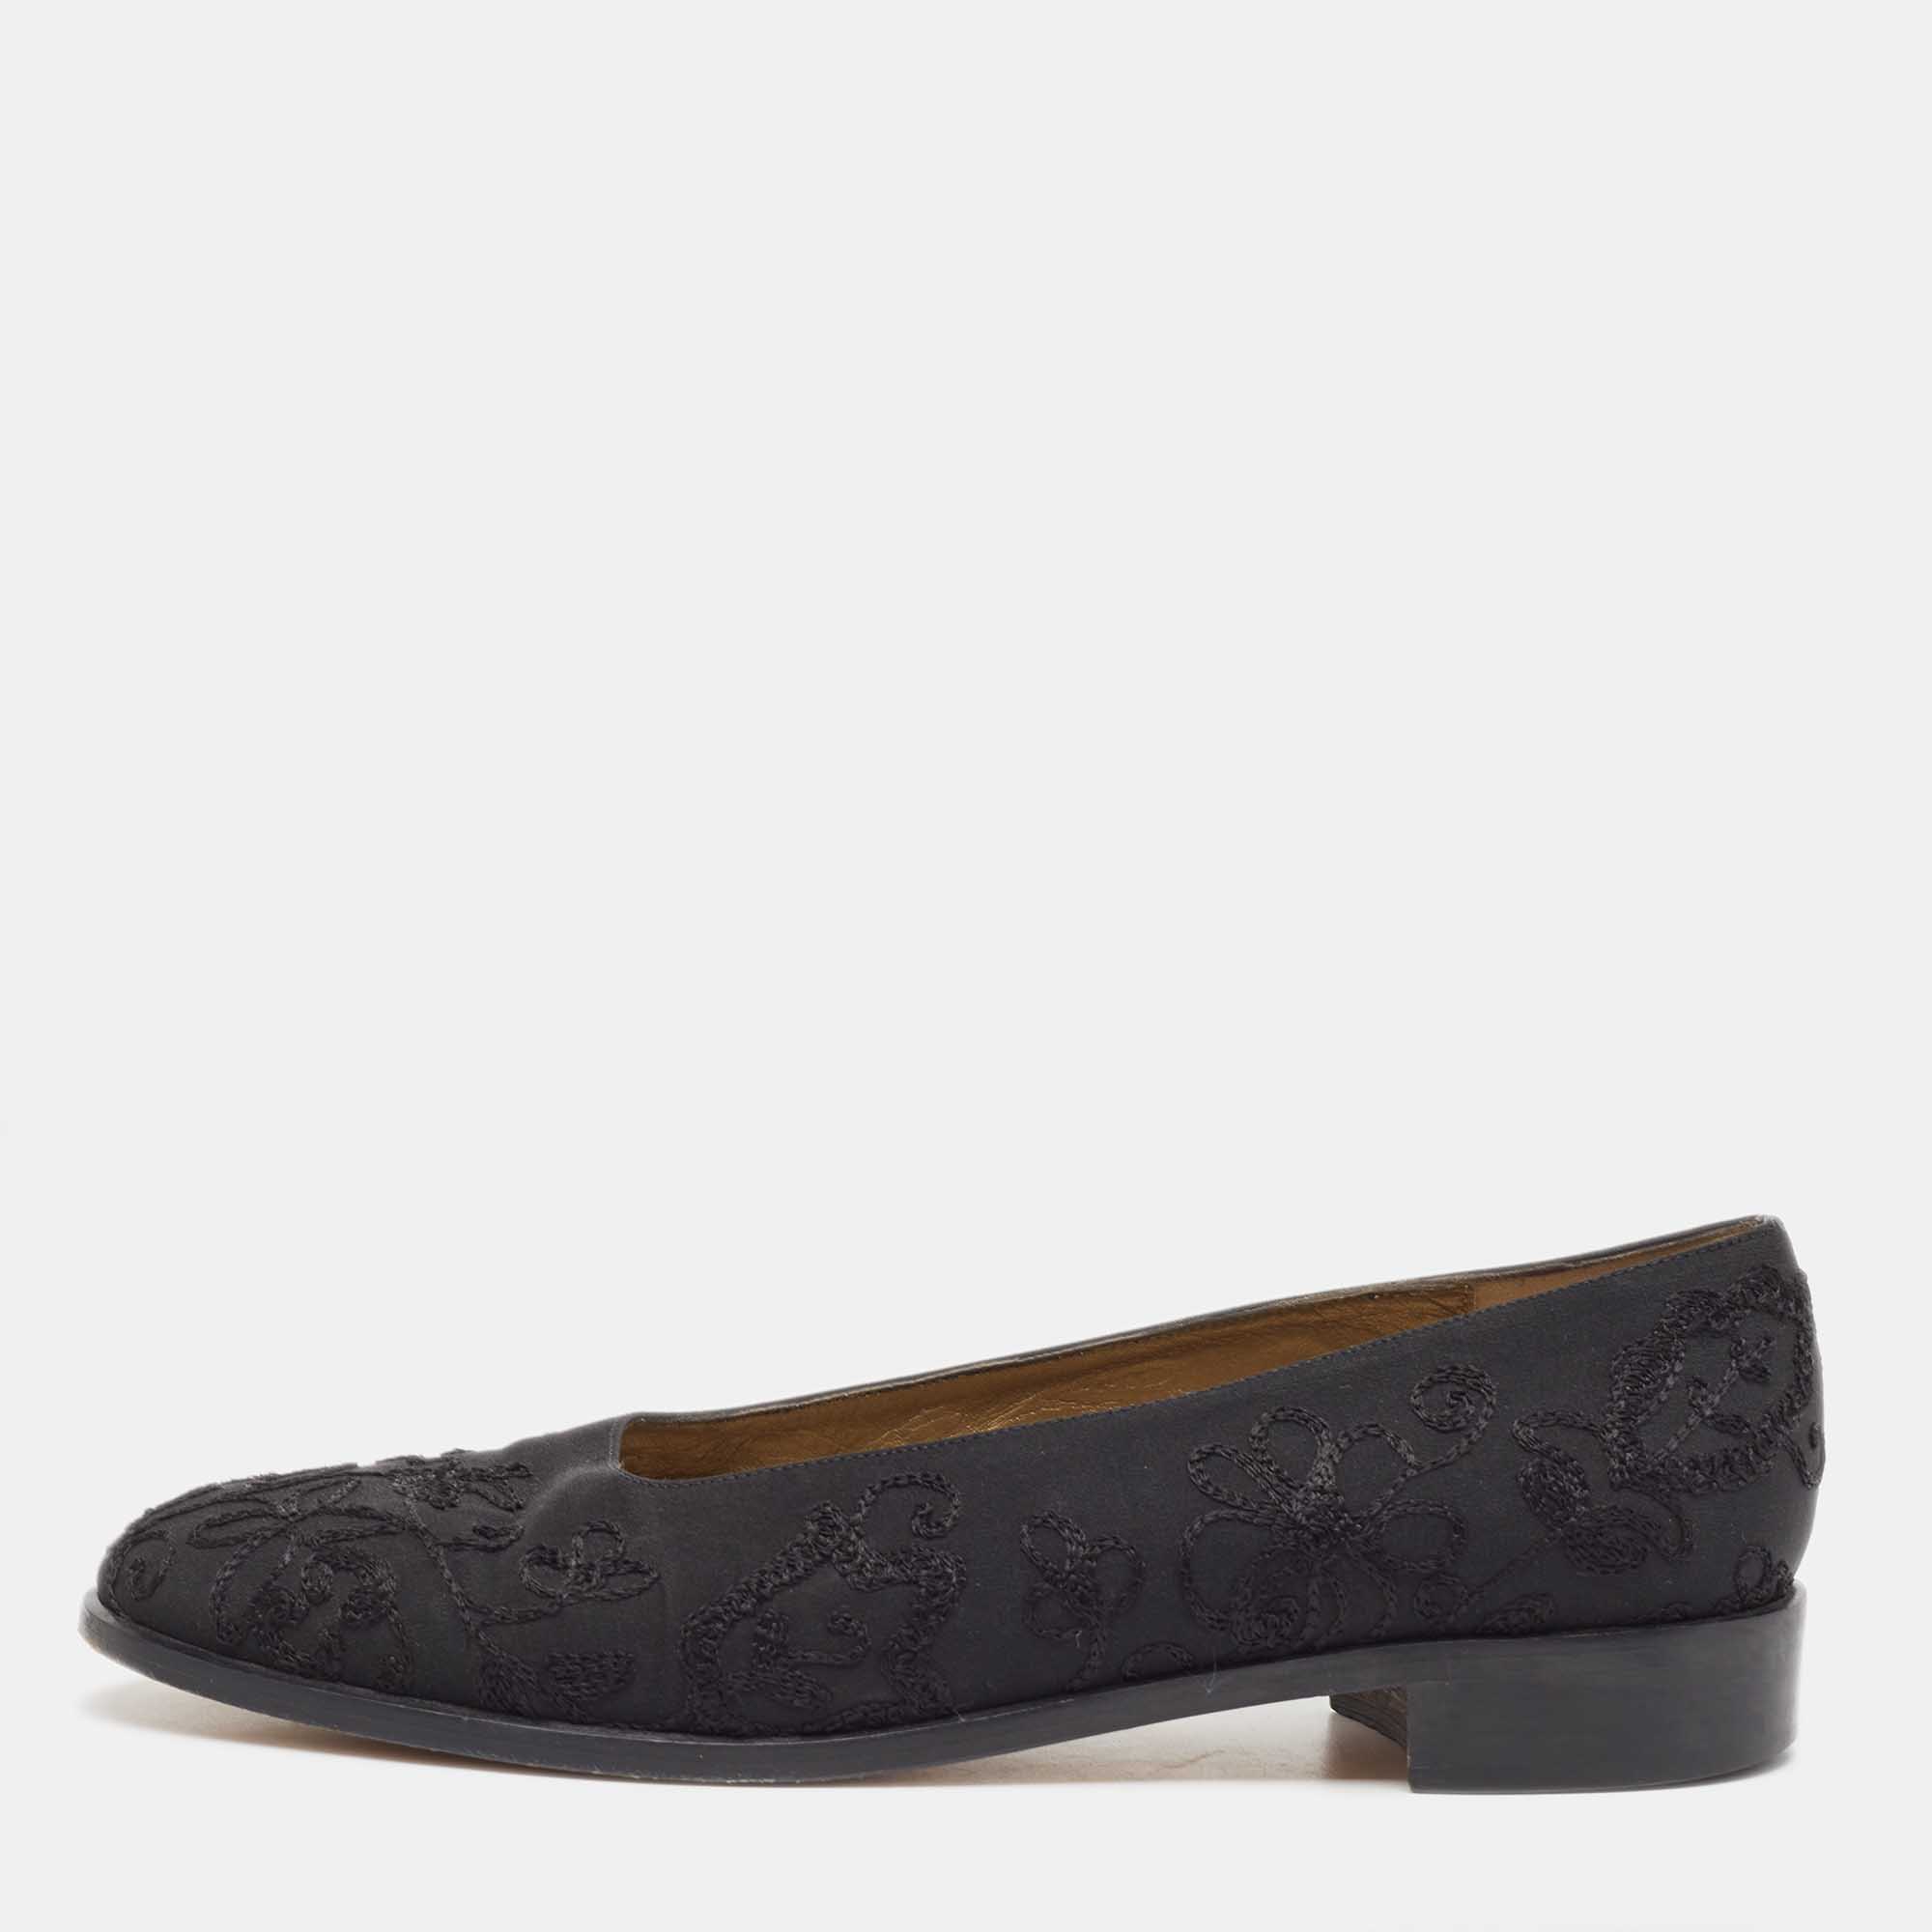 Yves saint laurent black embroidered fabric ballet flats size 38.5